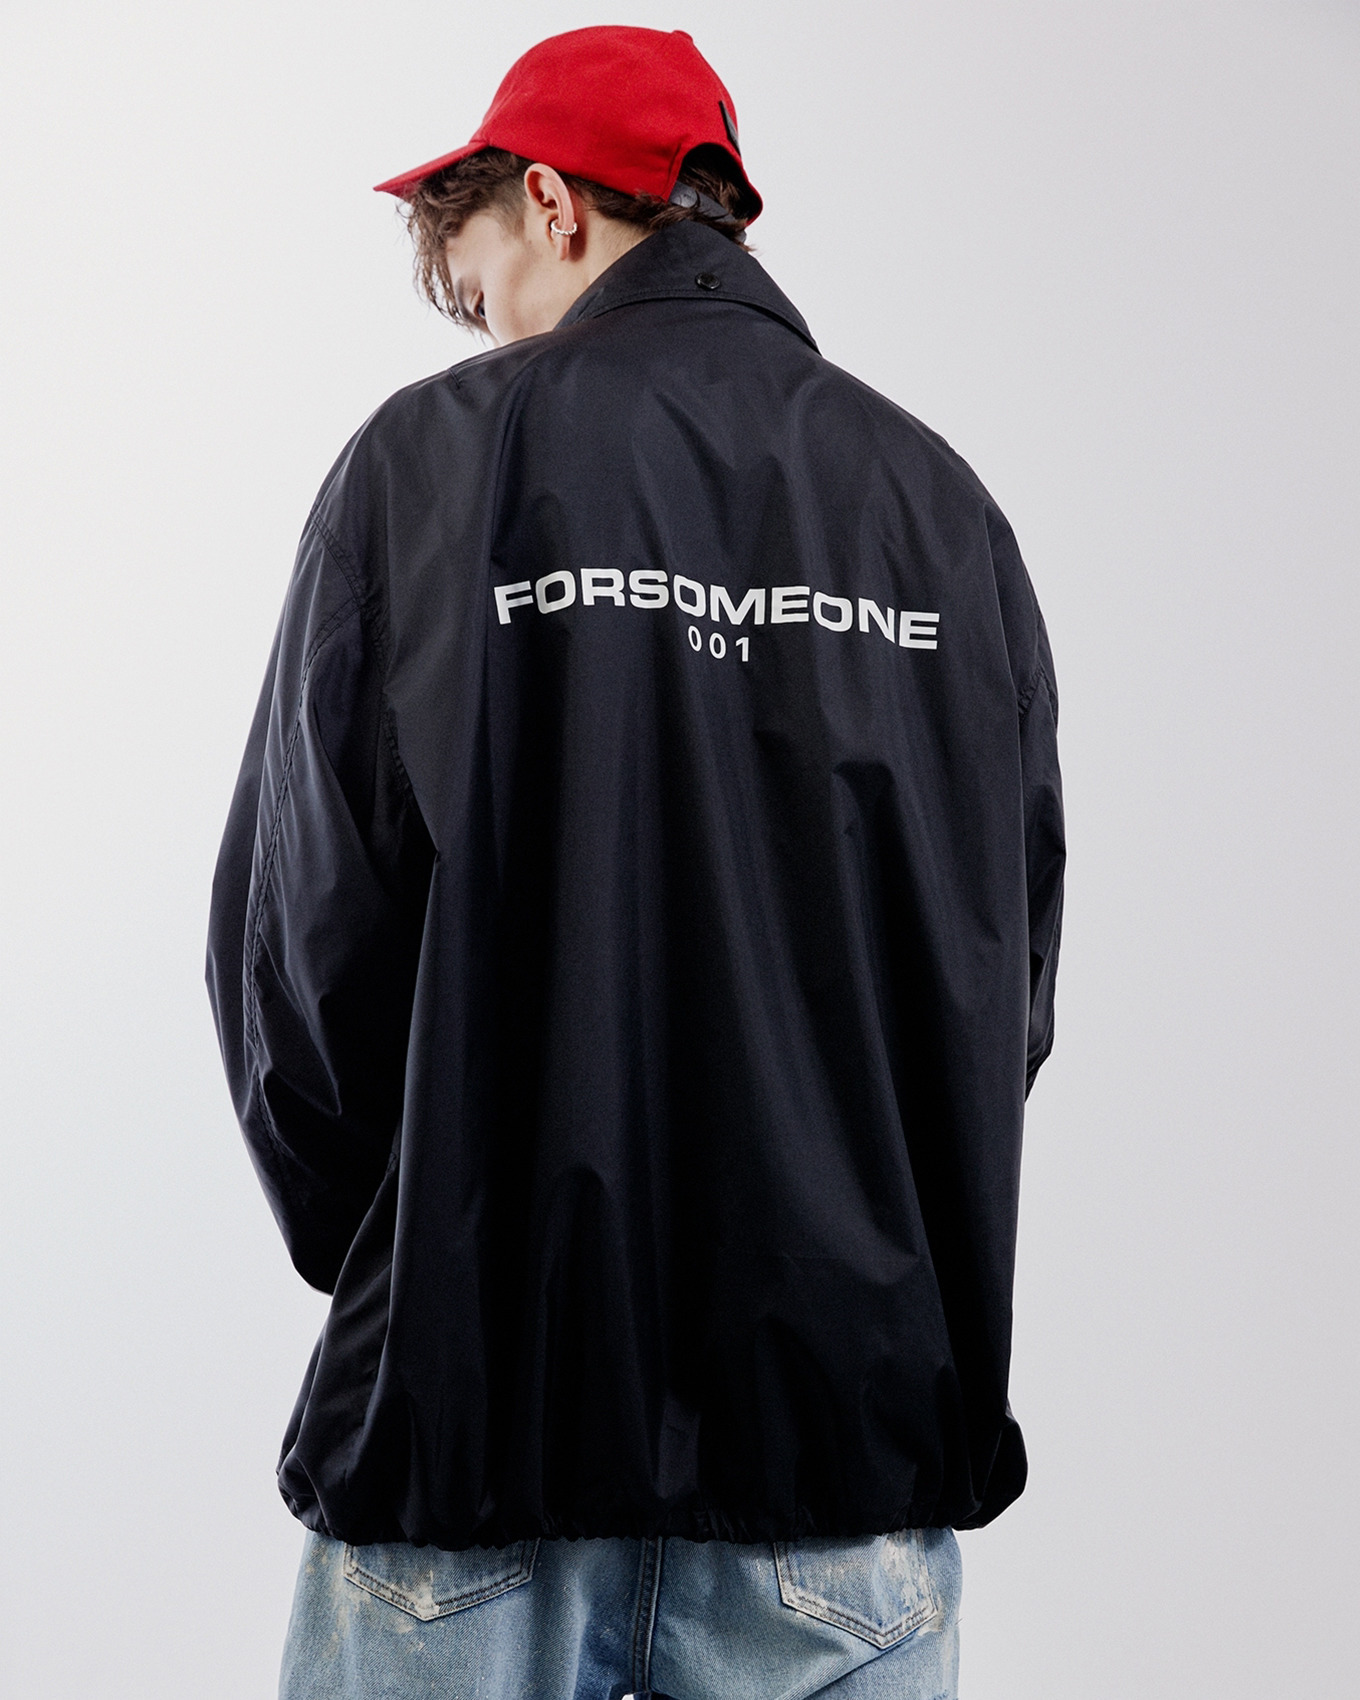 『LIMITED PRE-ORDER』 数量限定で FSO COACH JACKET の予約販売をスタート